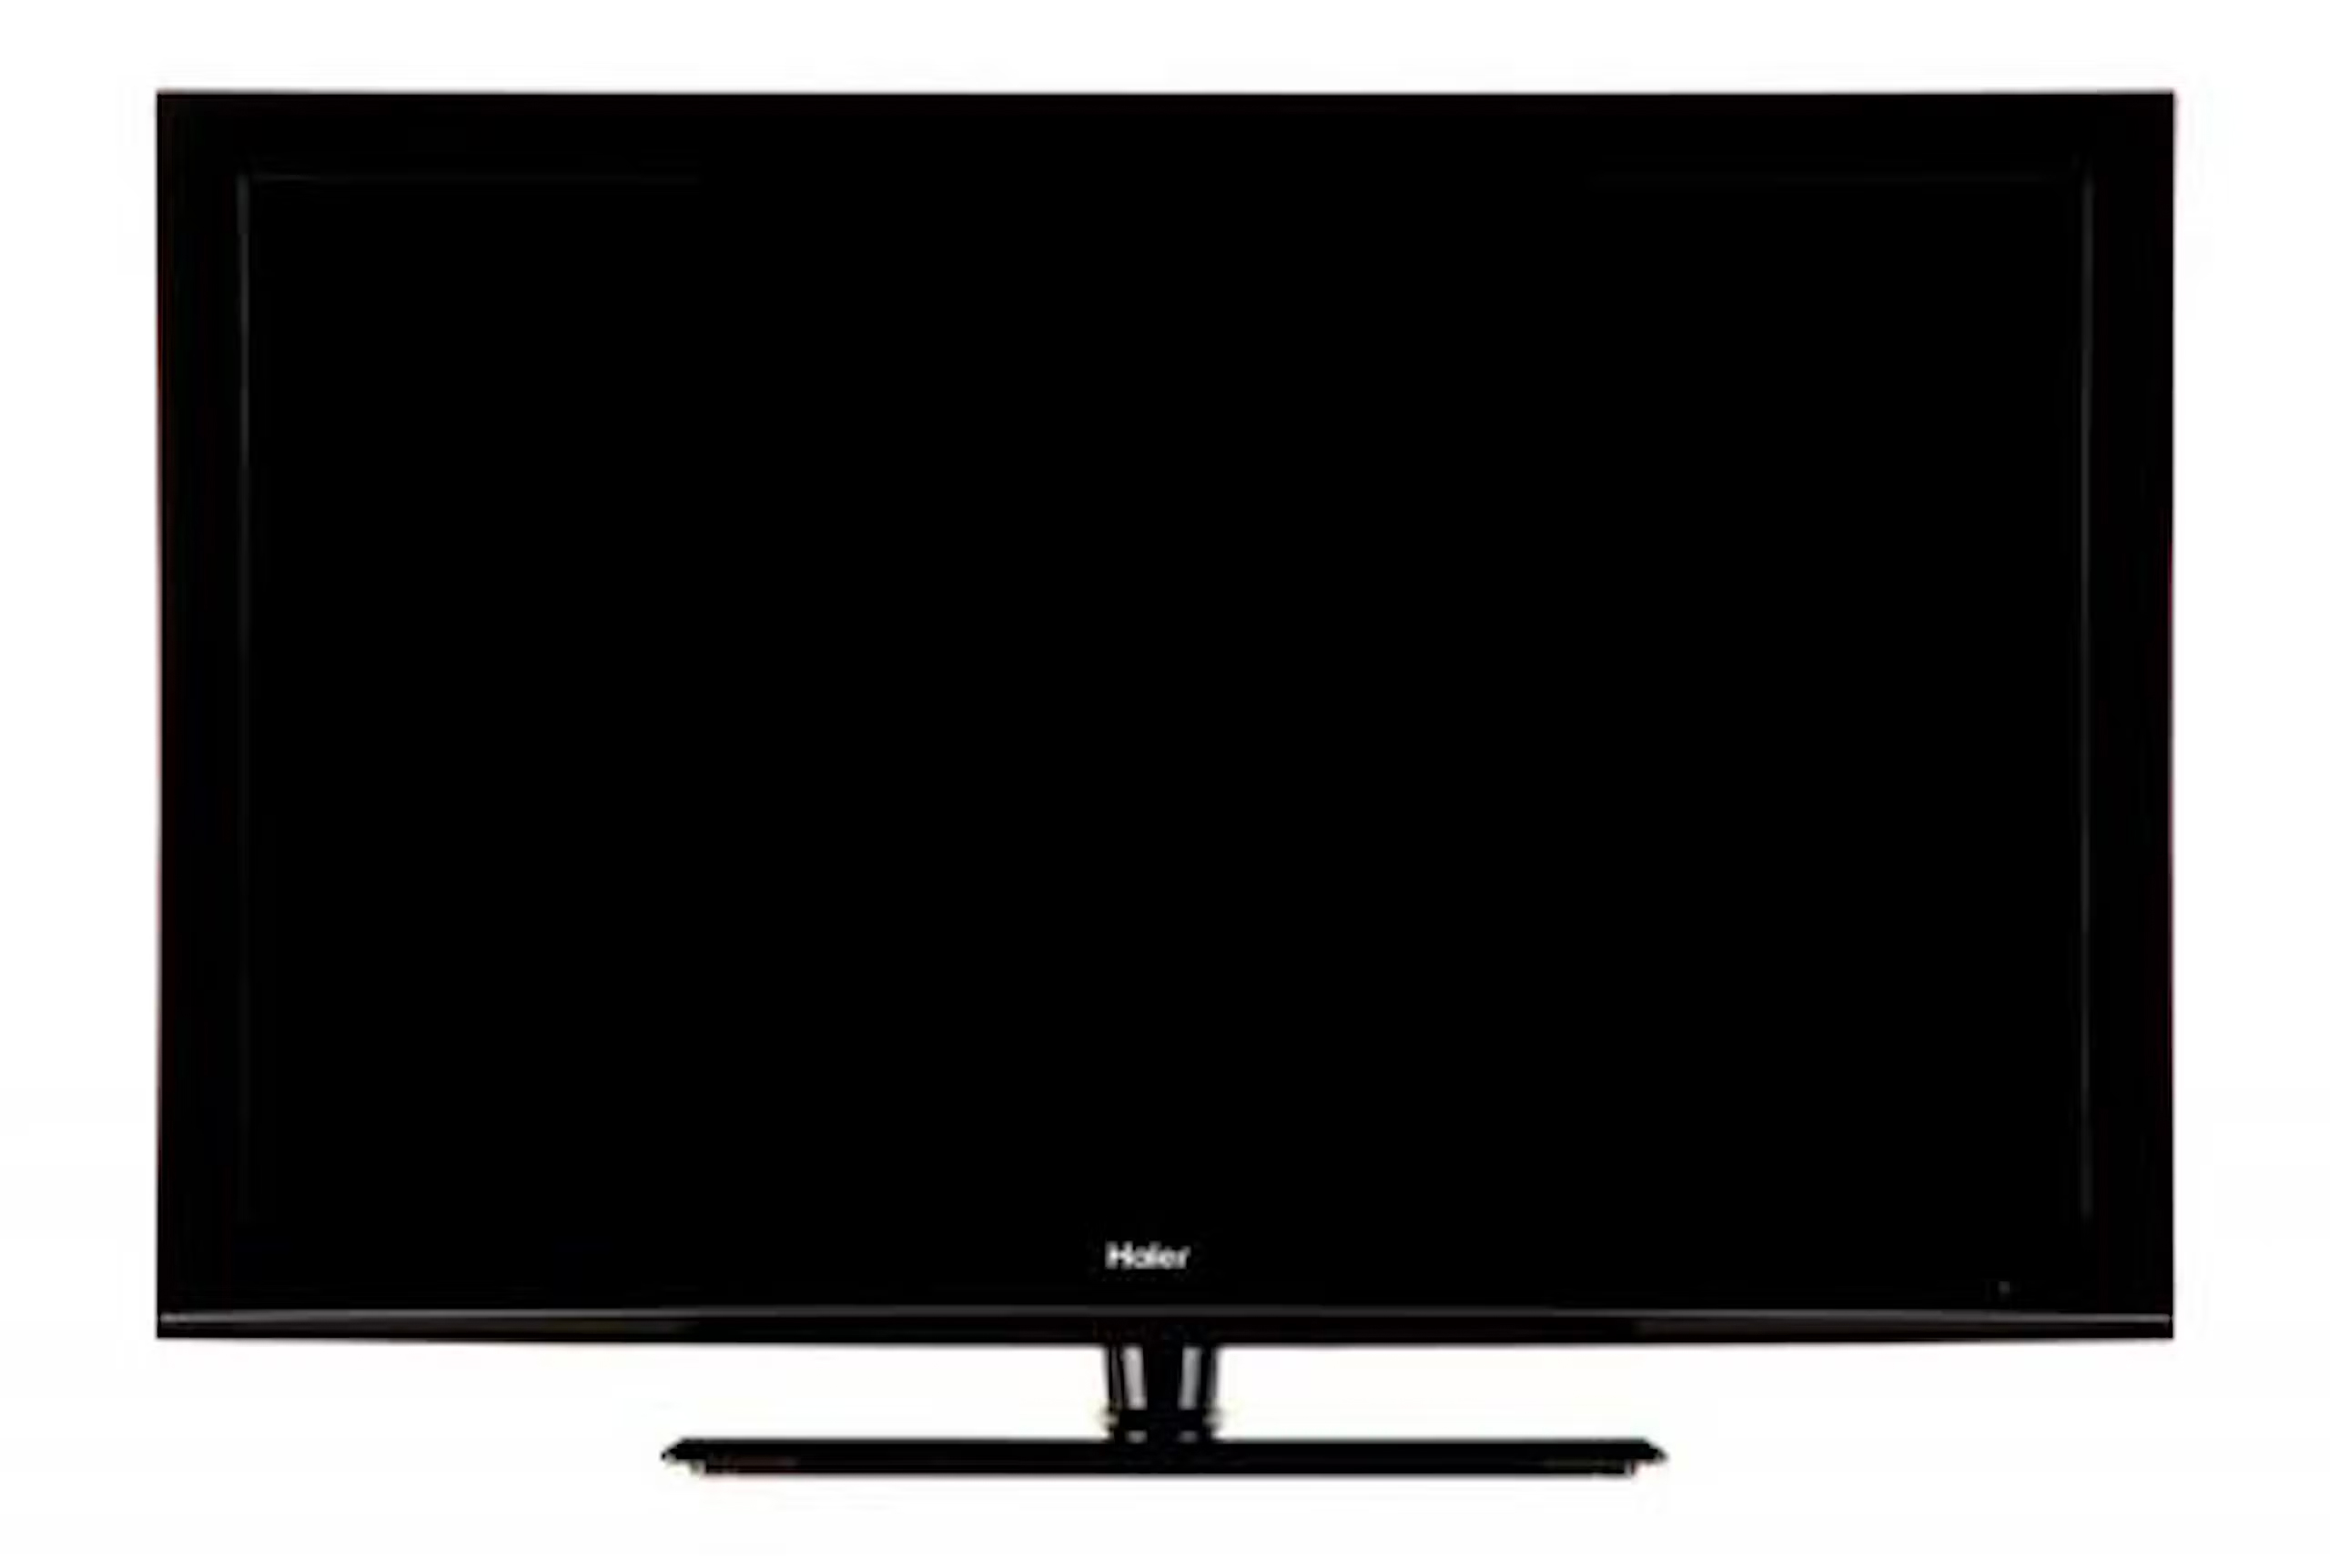 Product photo of a Haier LED TV currently being recalled